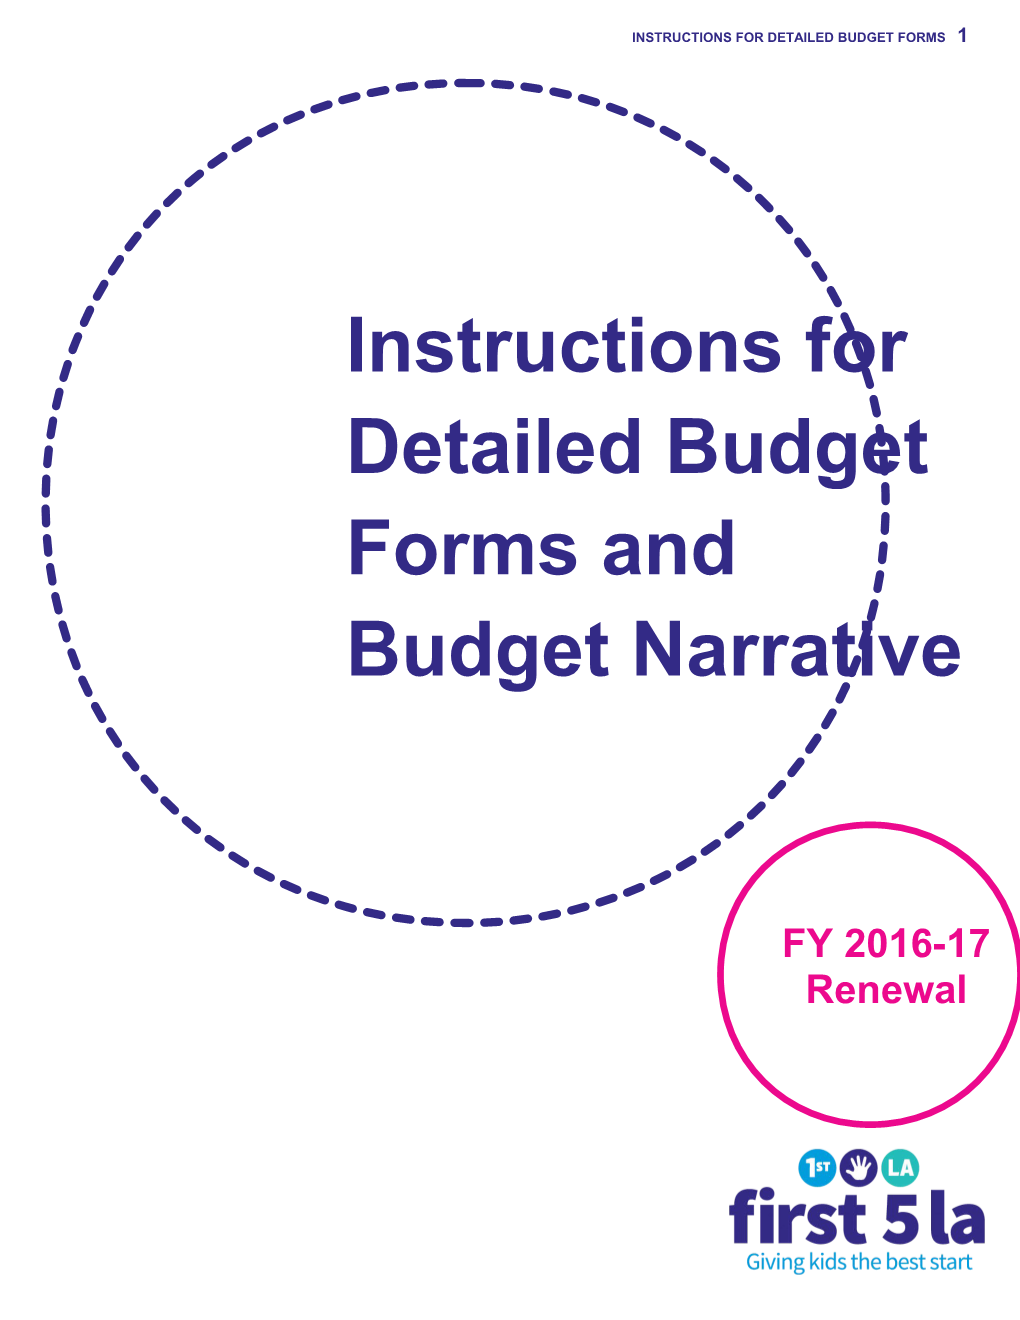 Instructions for Detailed Budget Forms 1